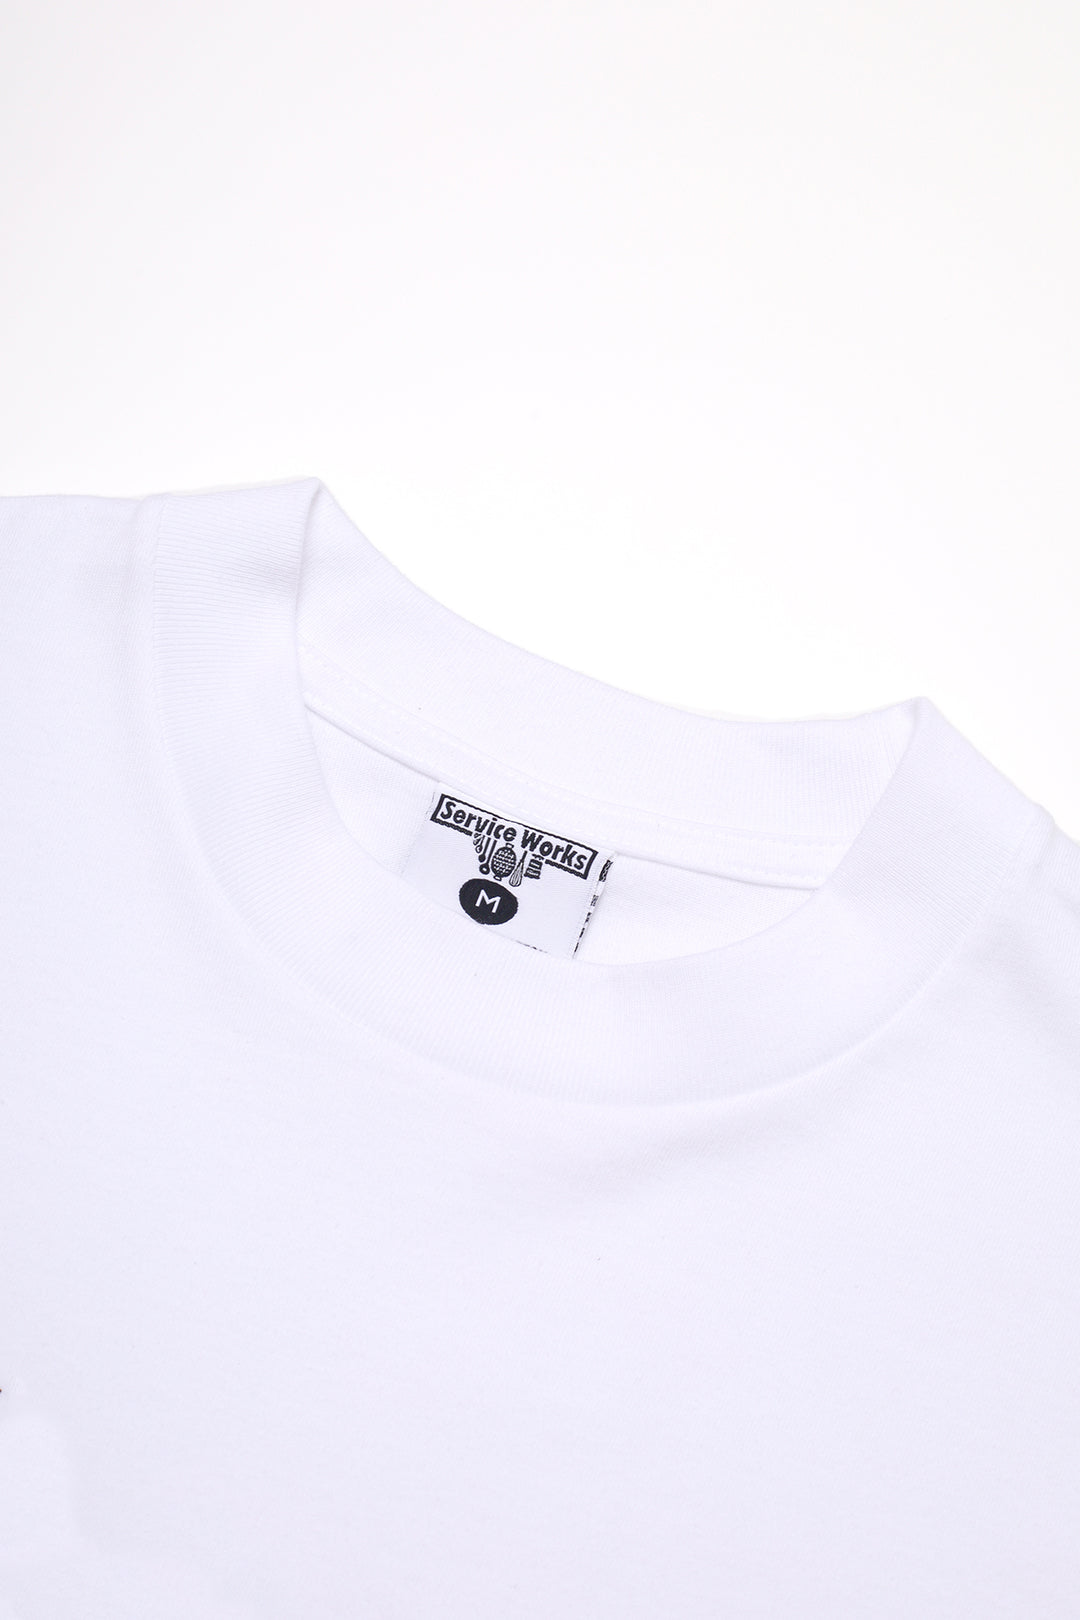 Service Works - Sunny Side Up Tee - White